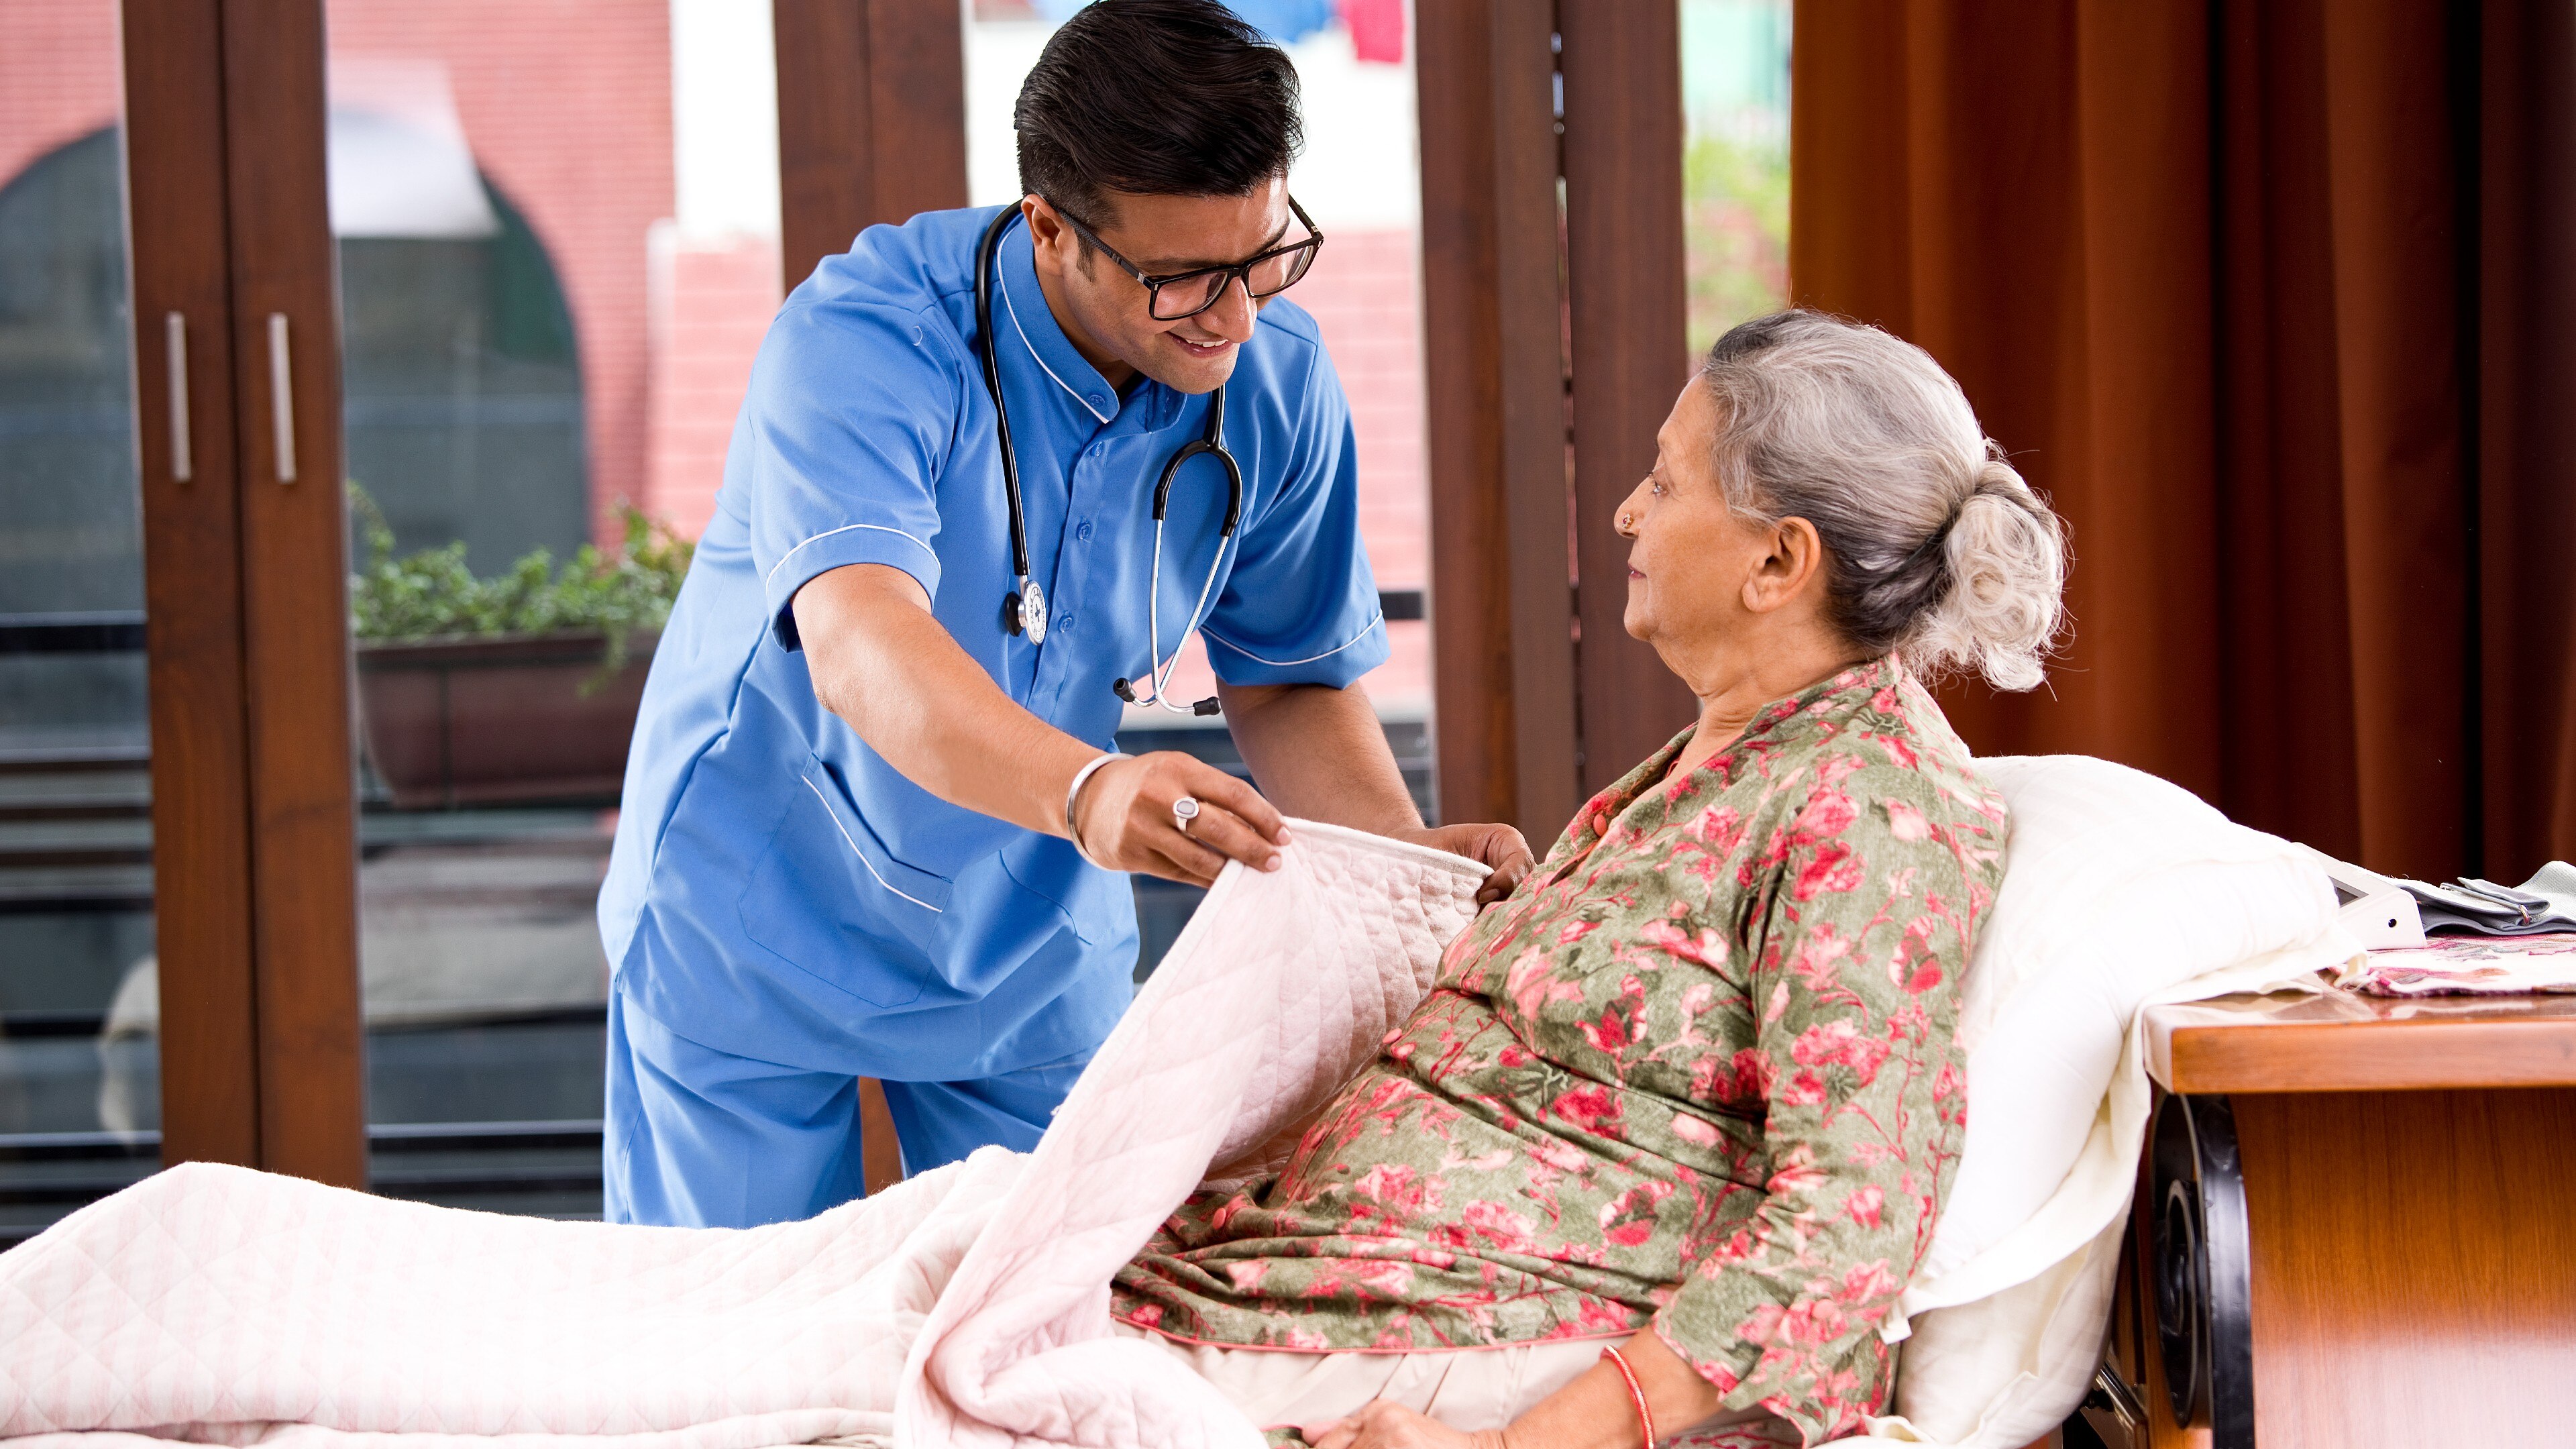 Aged care worker helping elderly in home care